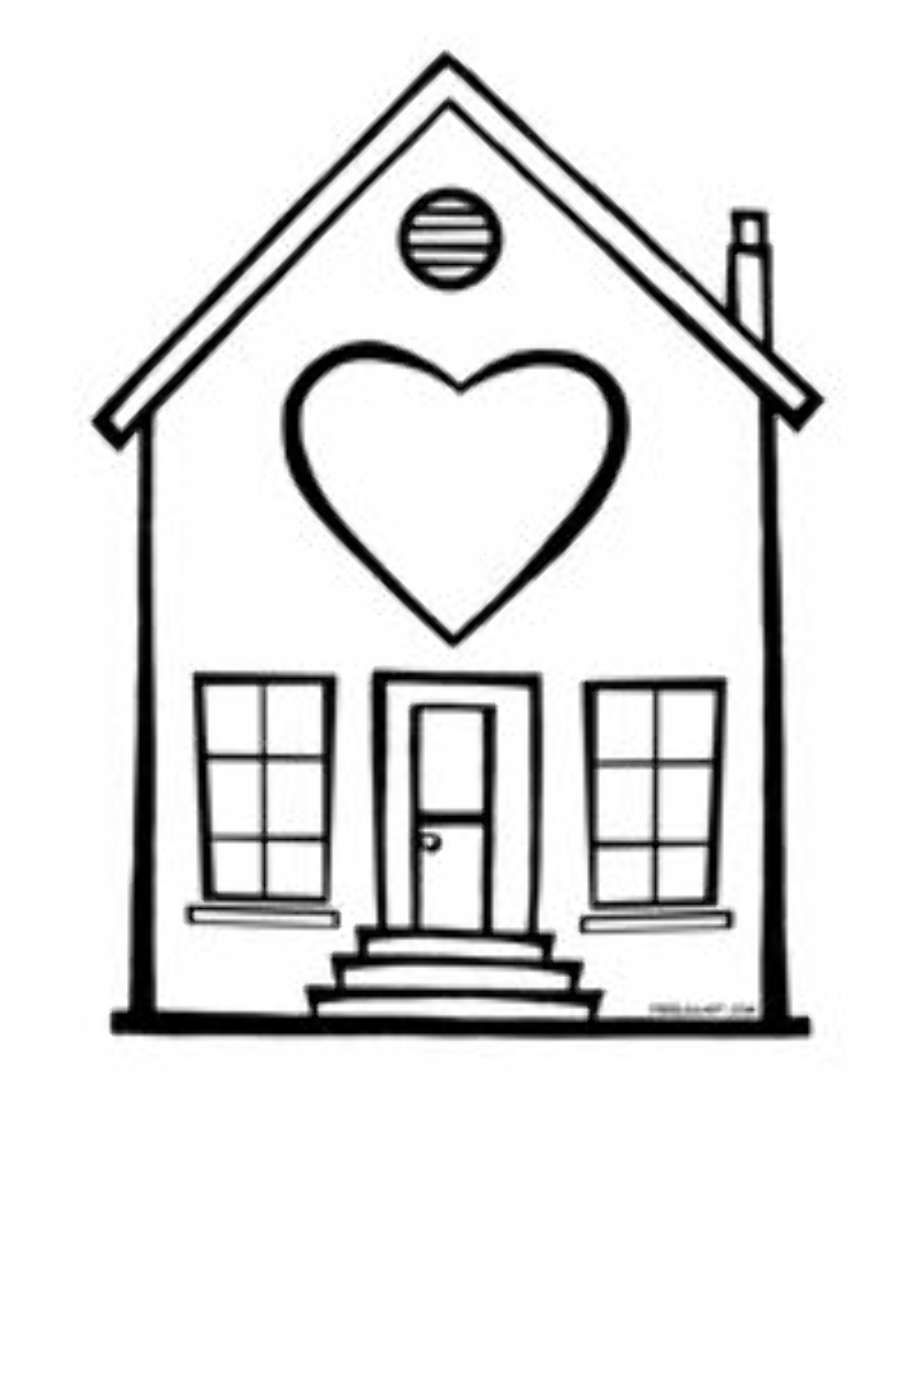 lds clipart home